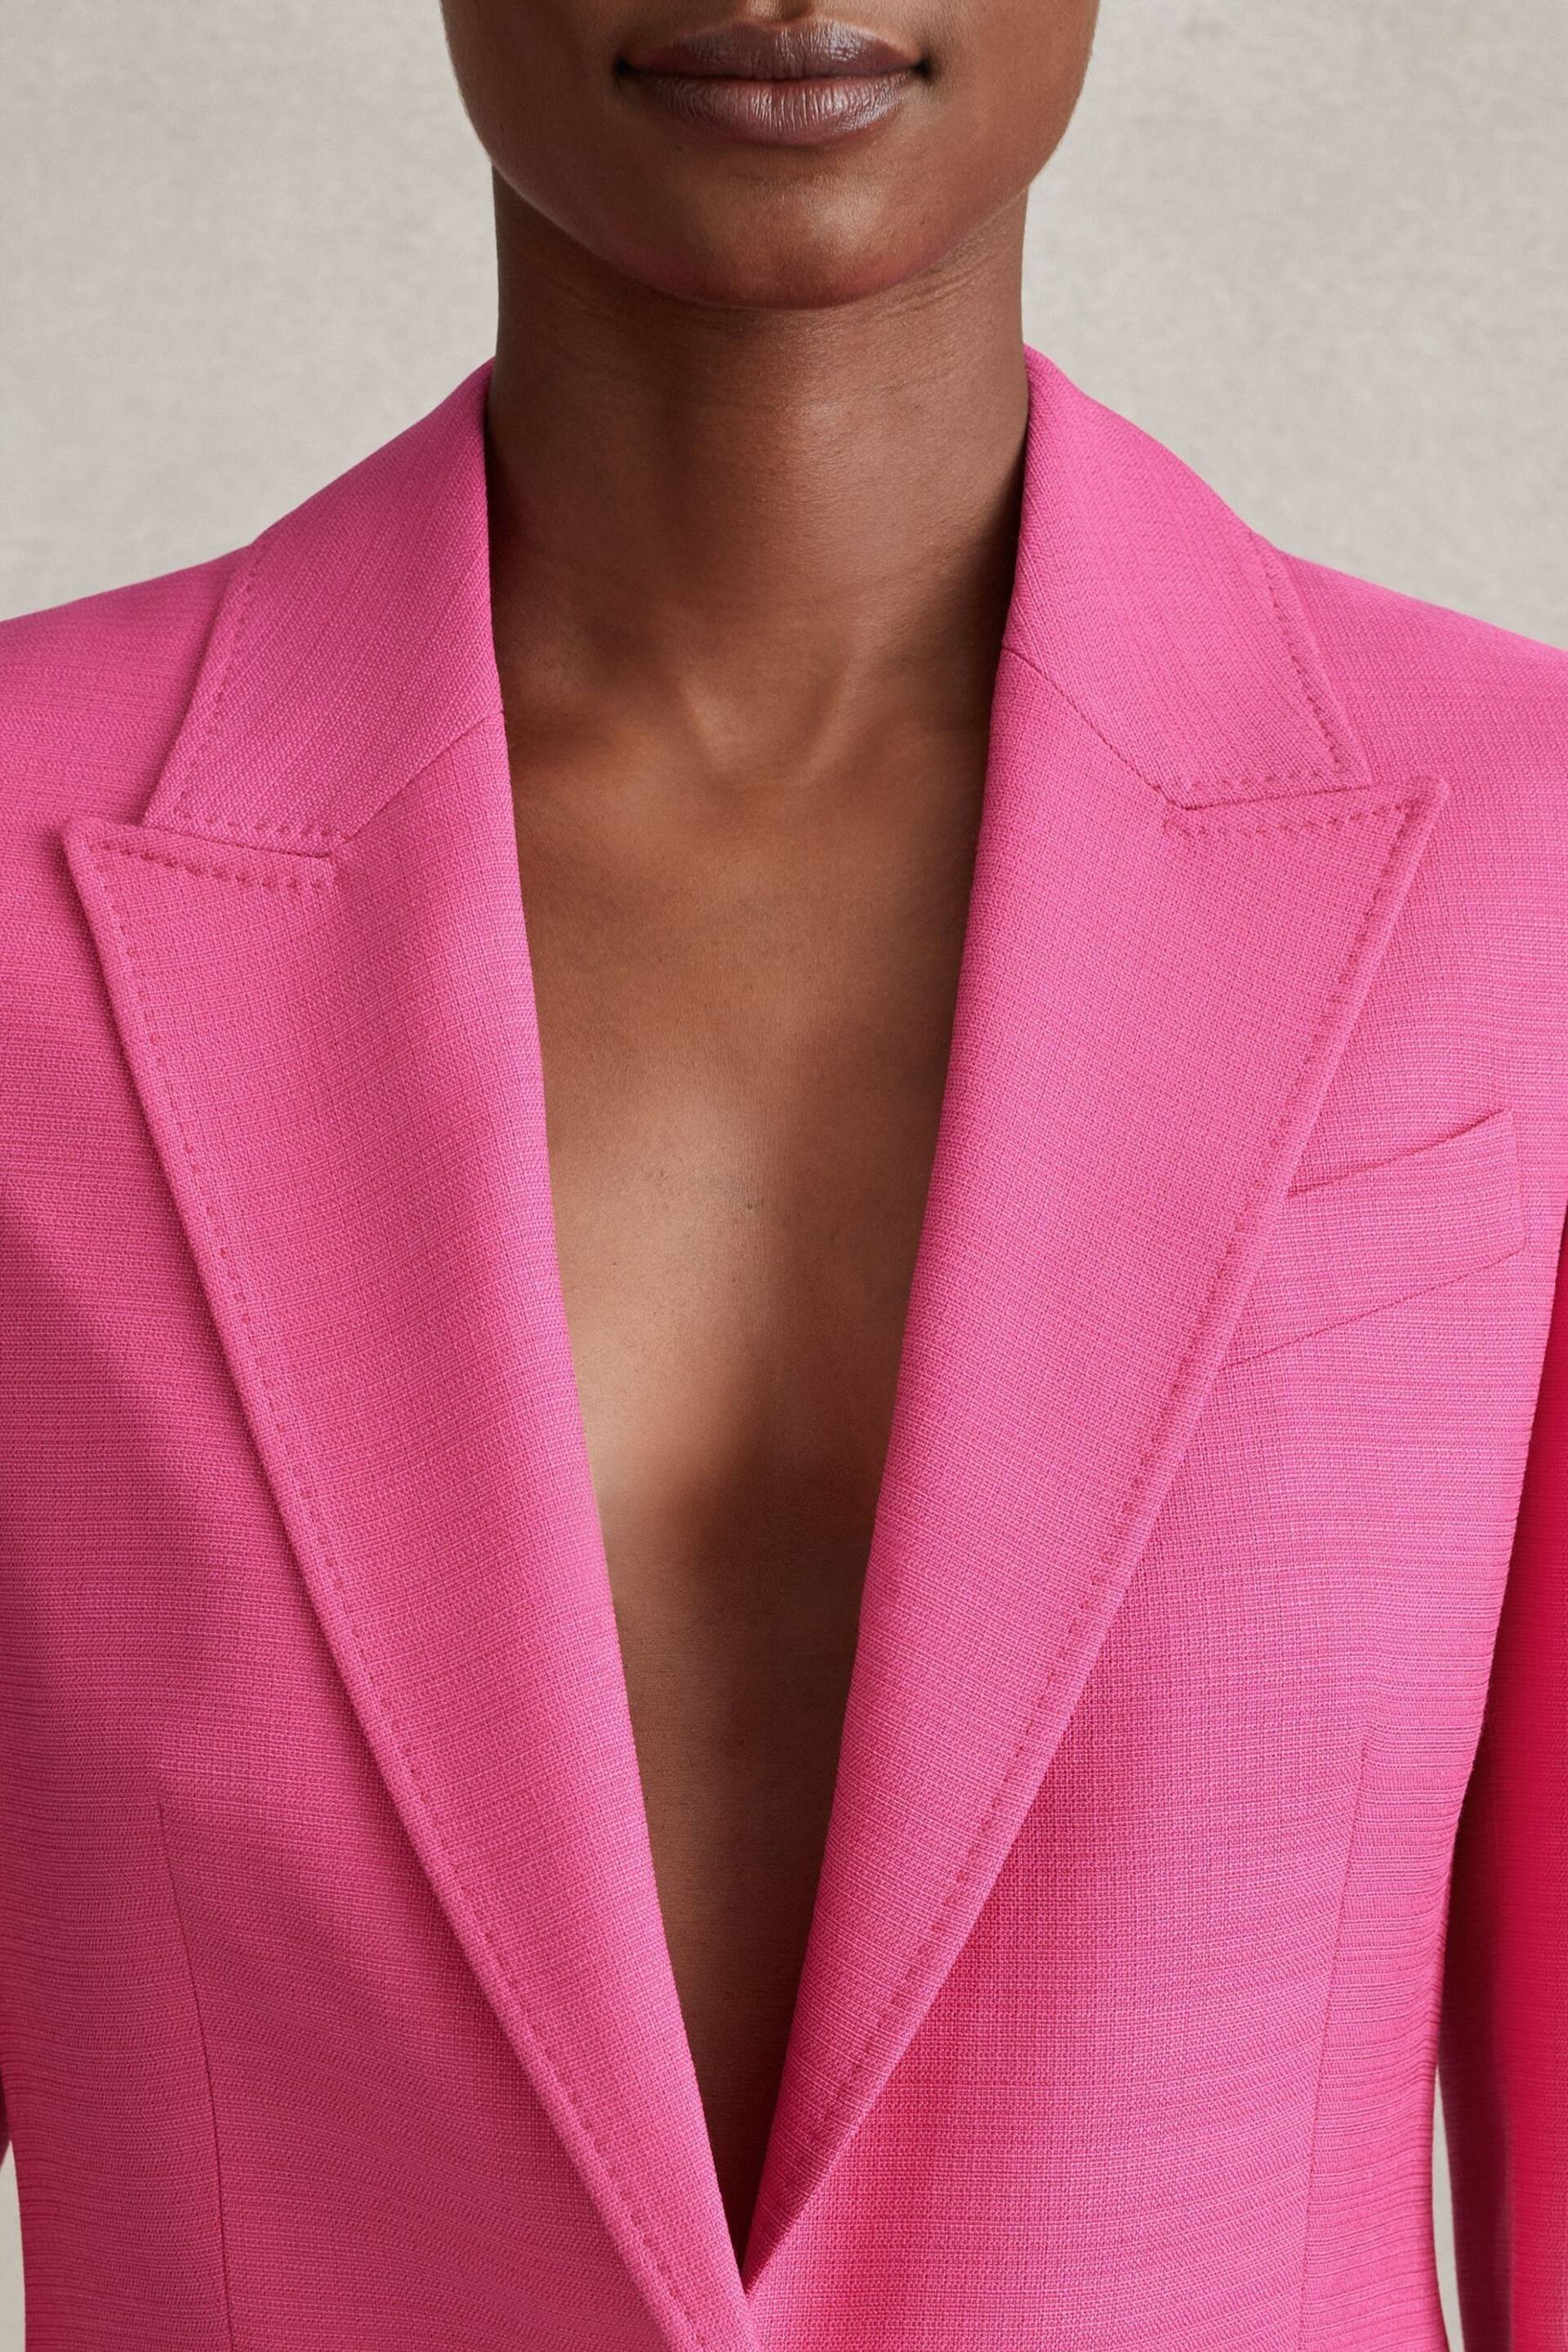 Reiss Pink Hewey Petite Tailored Textured Single Breasted Suit: Blazer - Image 4 of 7